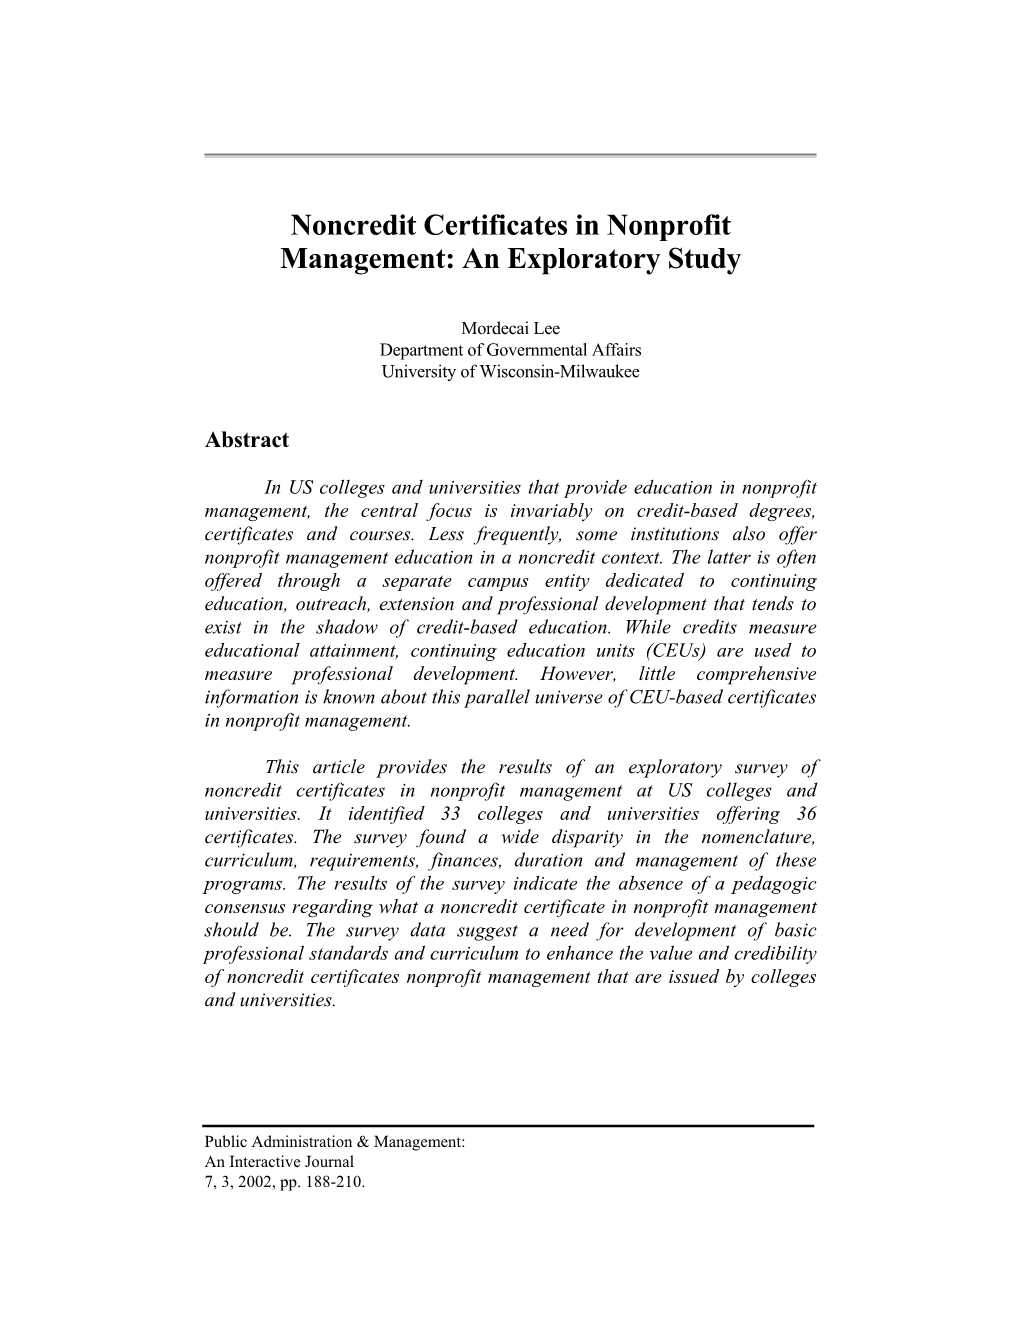 Noncredit Certificates in Nonprofit Management: an Exploratory Study